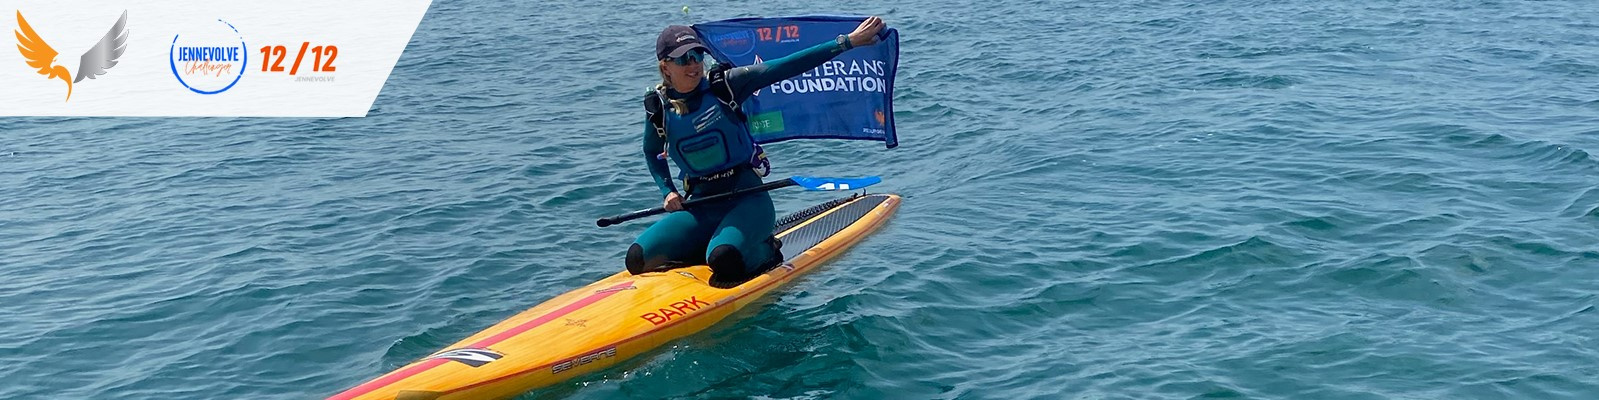 Jennifer Price on a paddle board in the English Channel waving a Veterans' Foundation flag